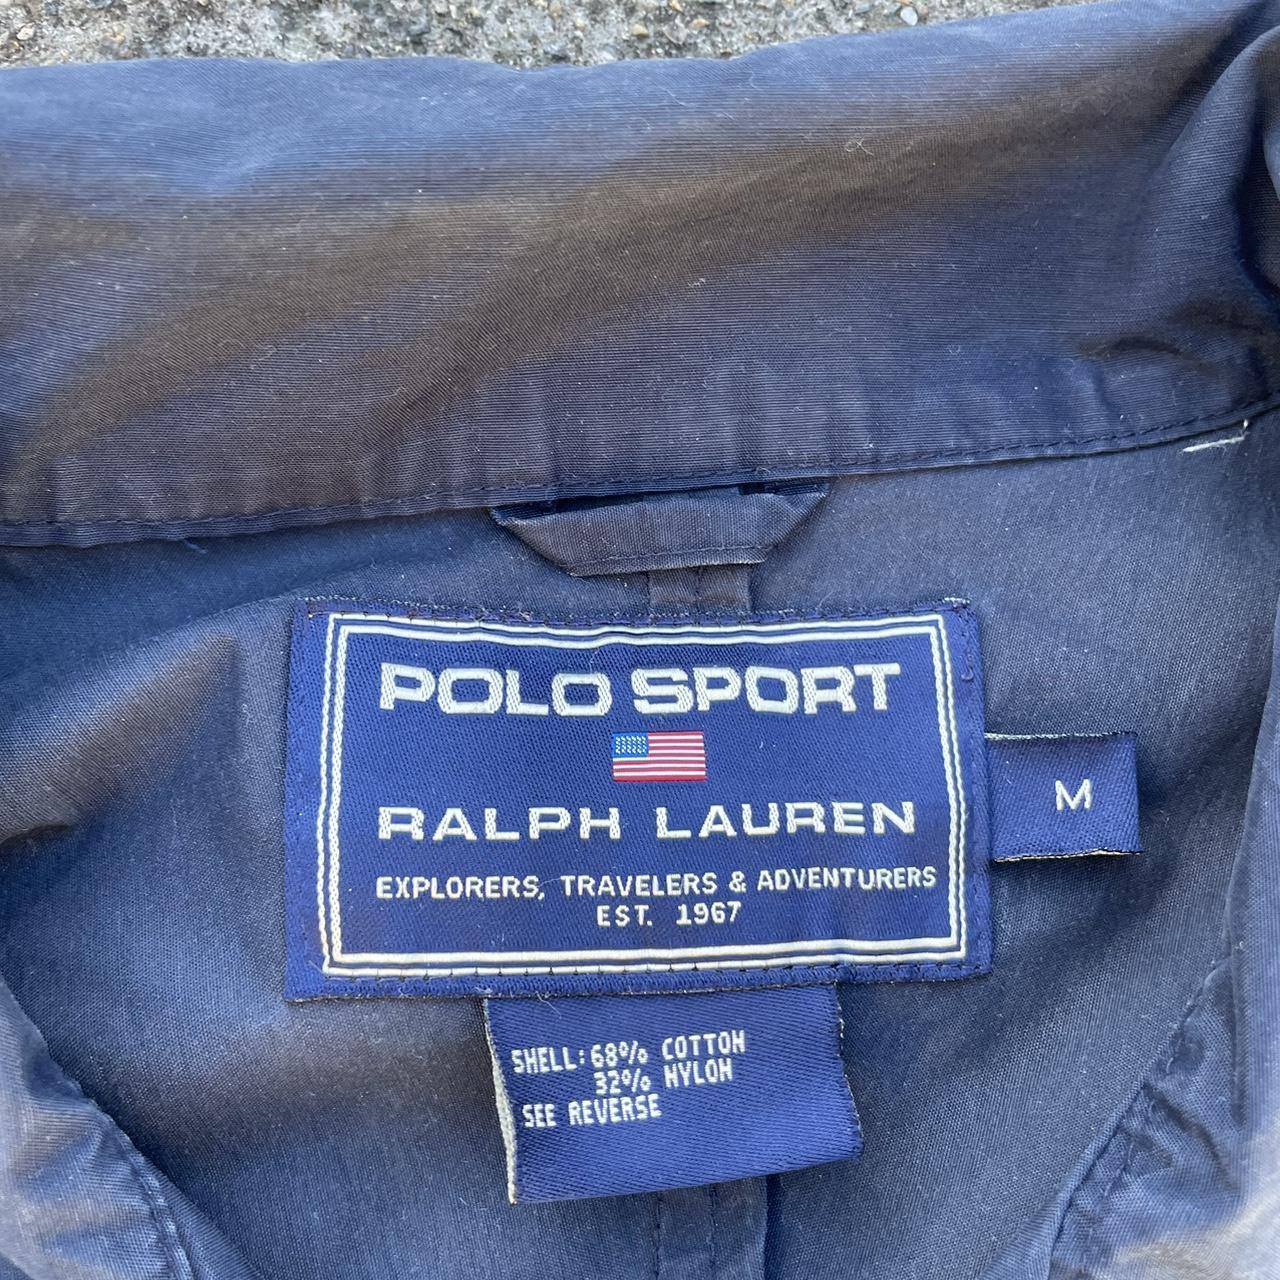 Polo Sport Men's Navy and Yellow Jacket | Depop